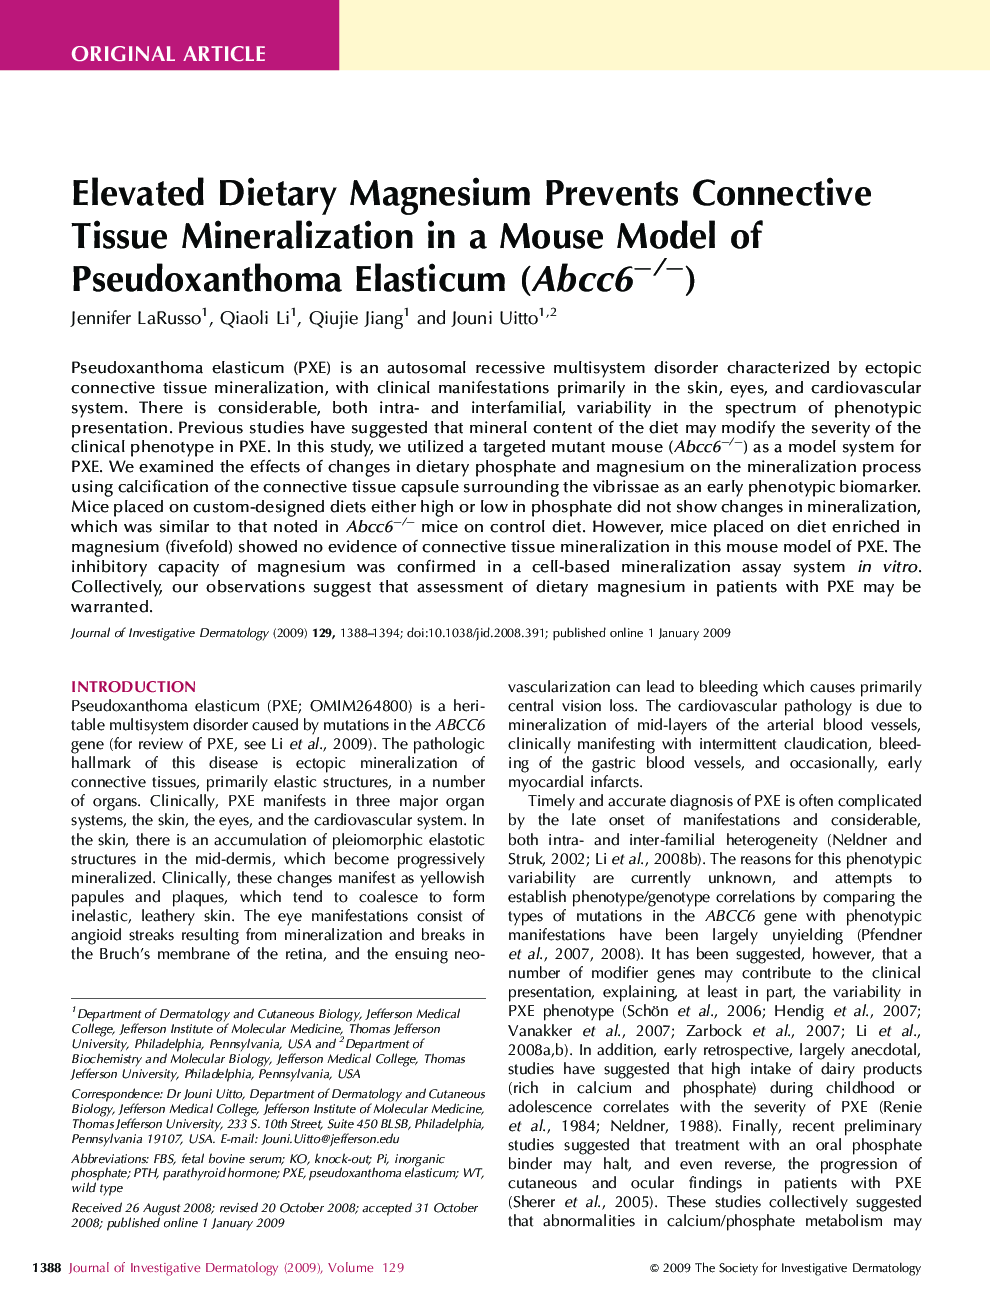 Elevated Dietary Magnesium Prevents Connective Tissue Mineralization in a Mouse Model of Pseudoxanthoma Elasticum (Abcc6−/−)